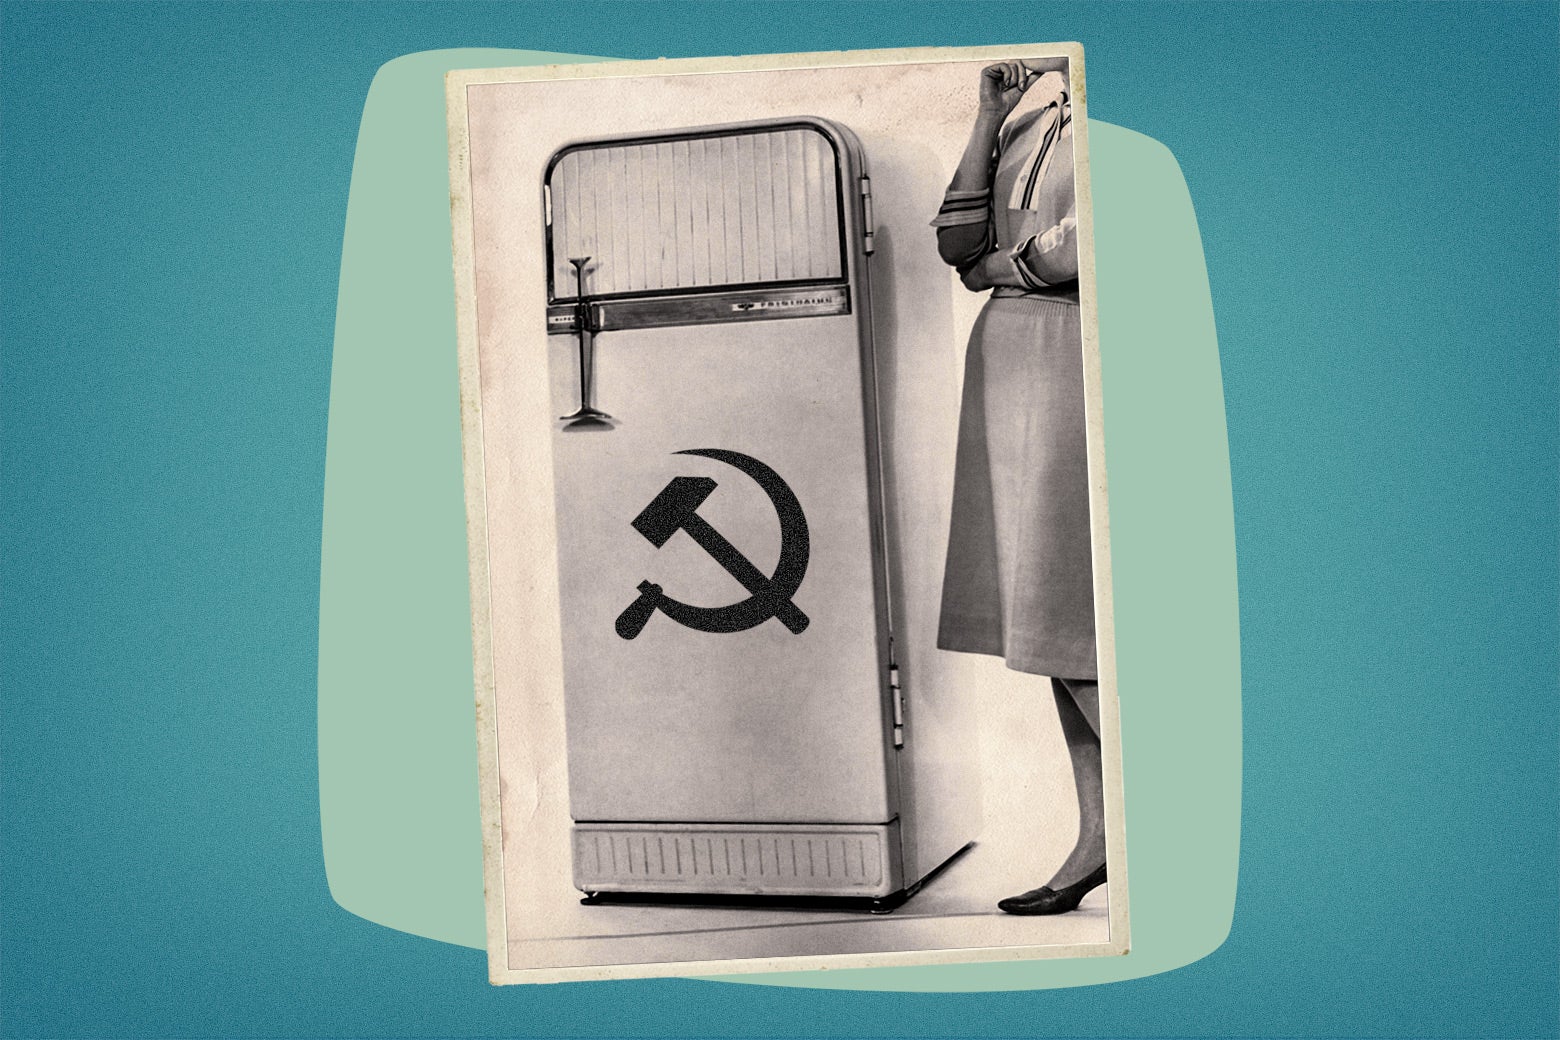 A photo illustration with an old-fashioned black-and-white image of a fridge with a hammer and sickle superimposed on it, and a woman in a dress and heels with her arms crossed, standing off to the side.